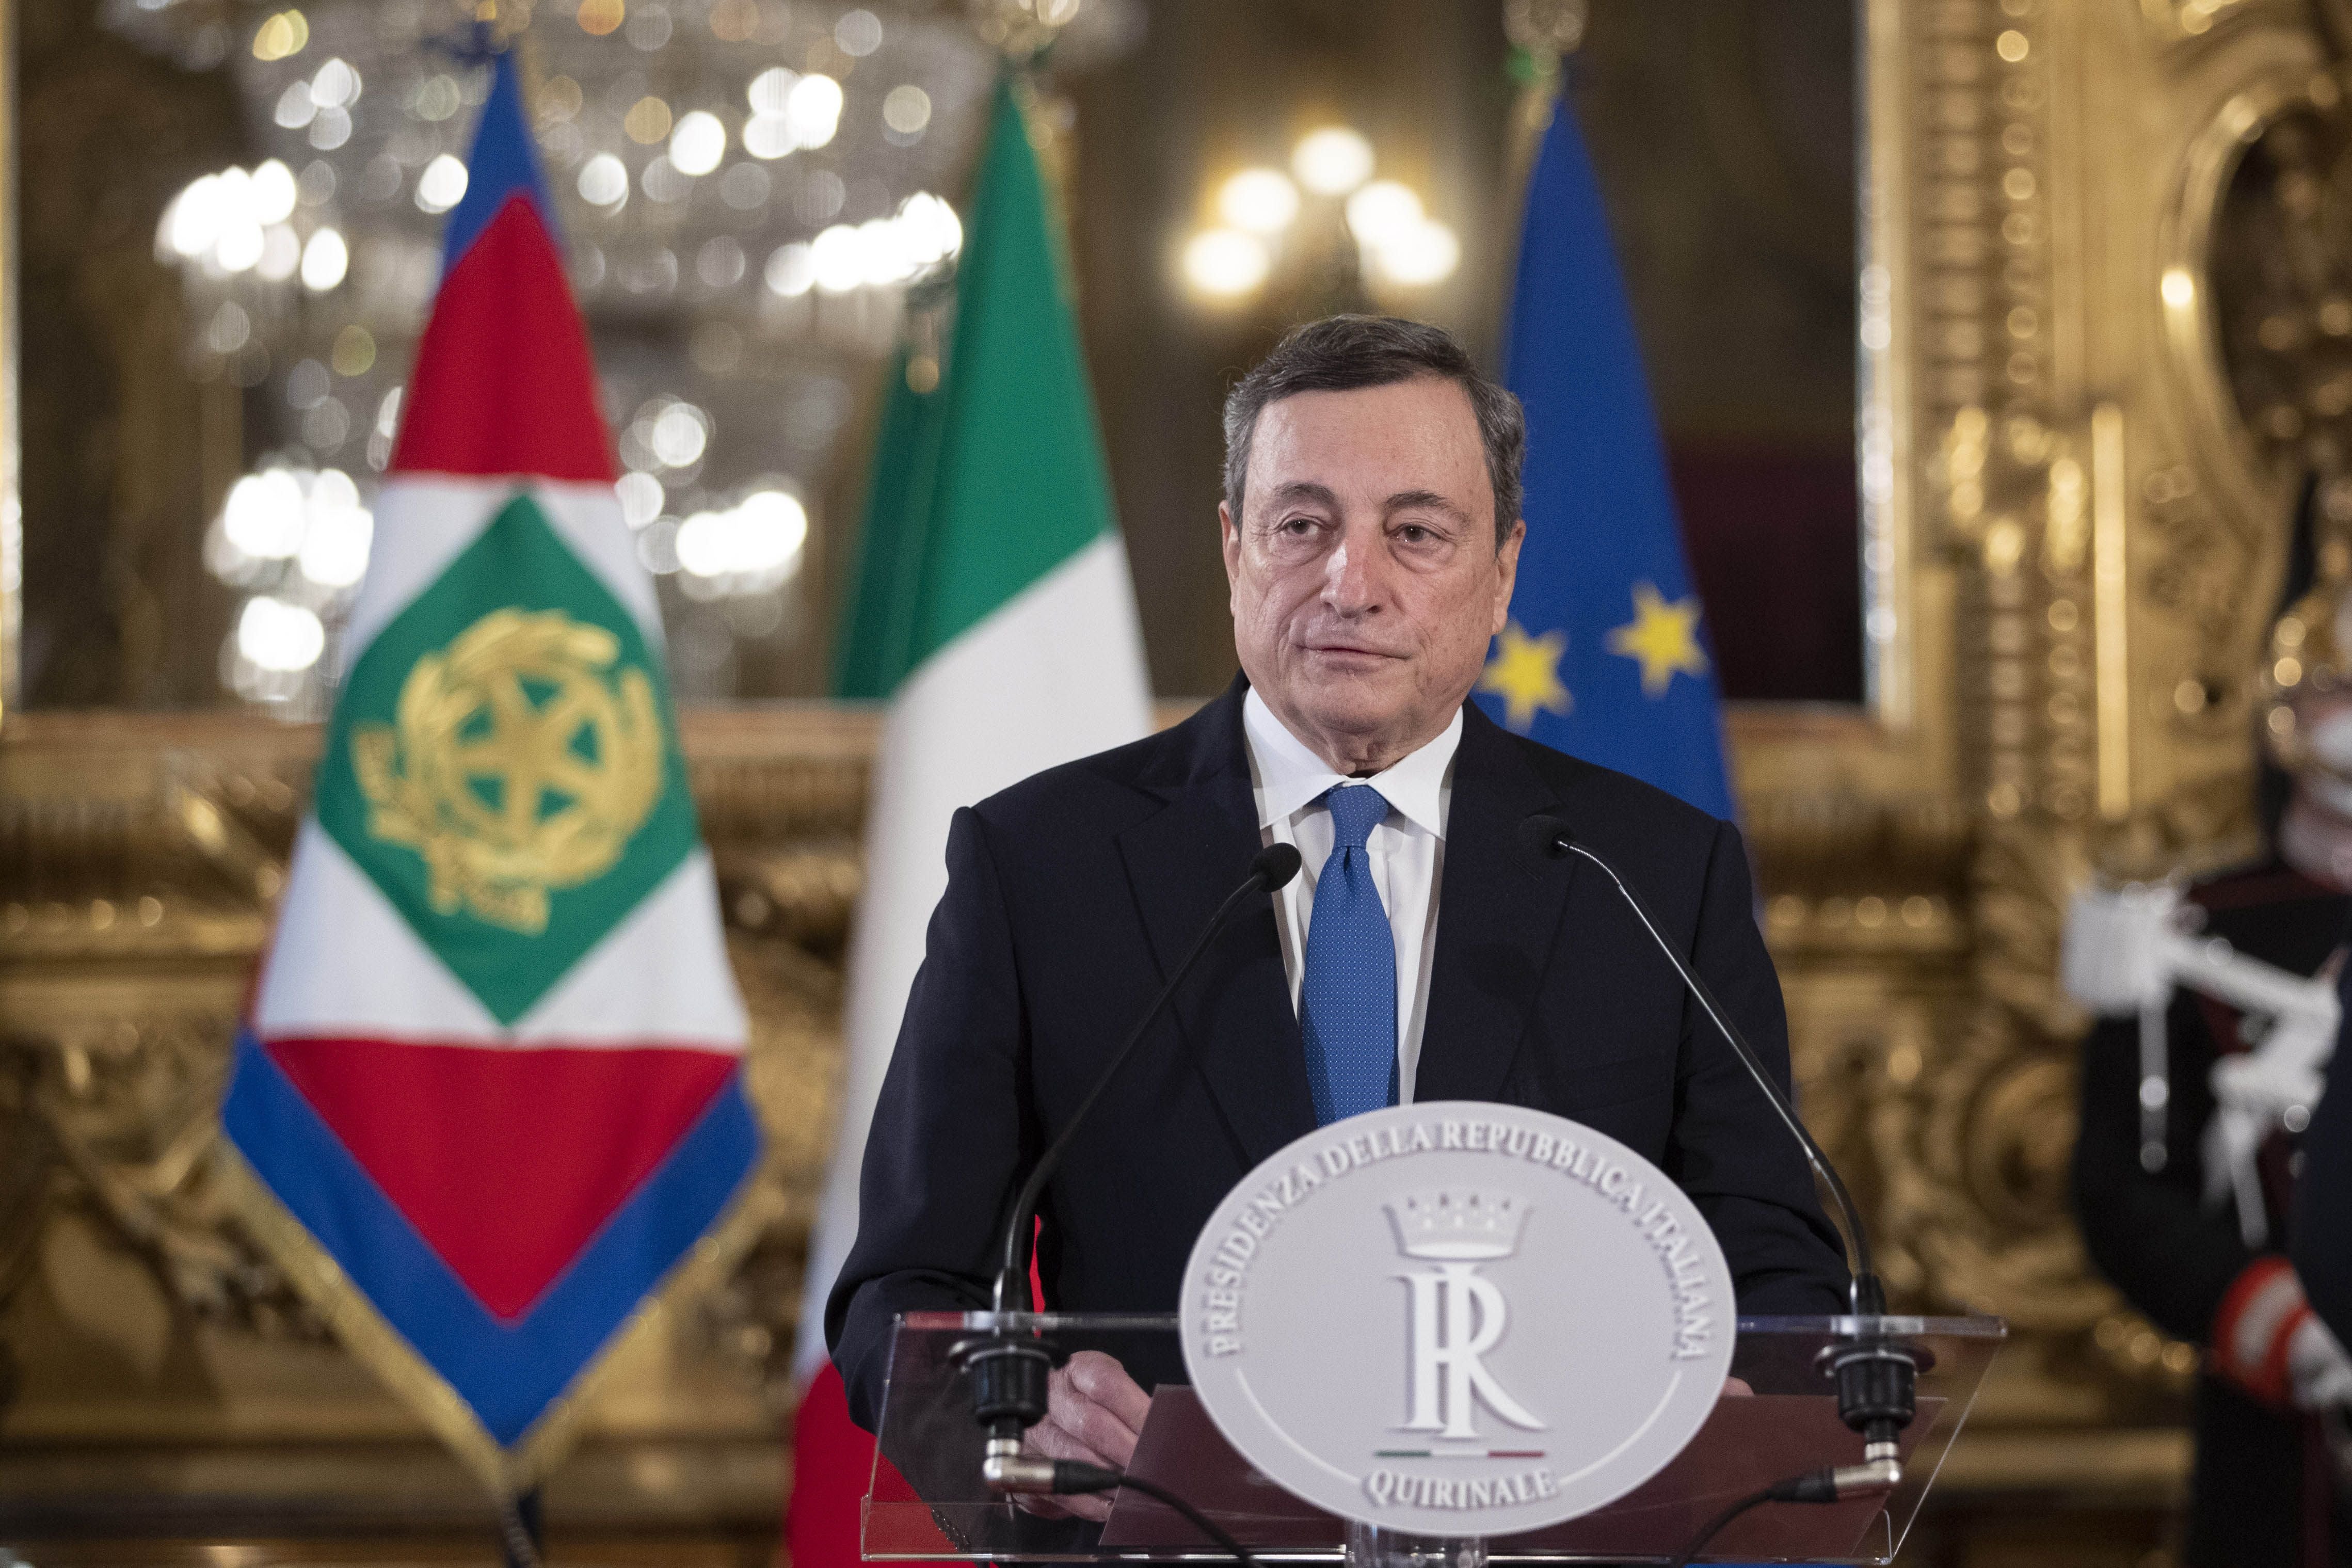 Mario Draghi has been set the task of forming a new Italian government